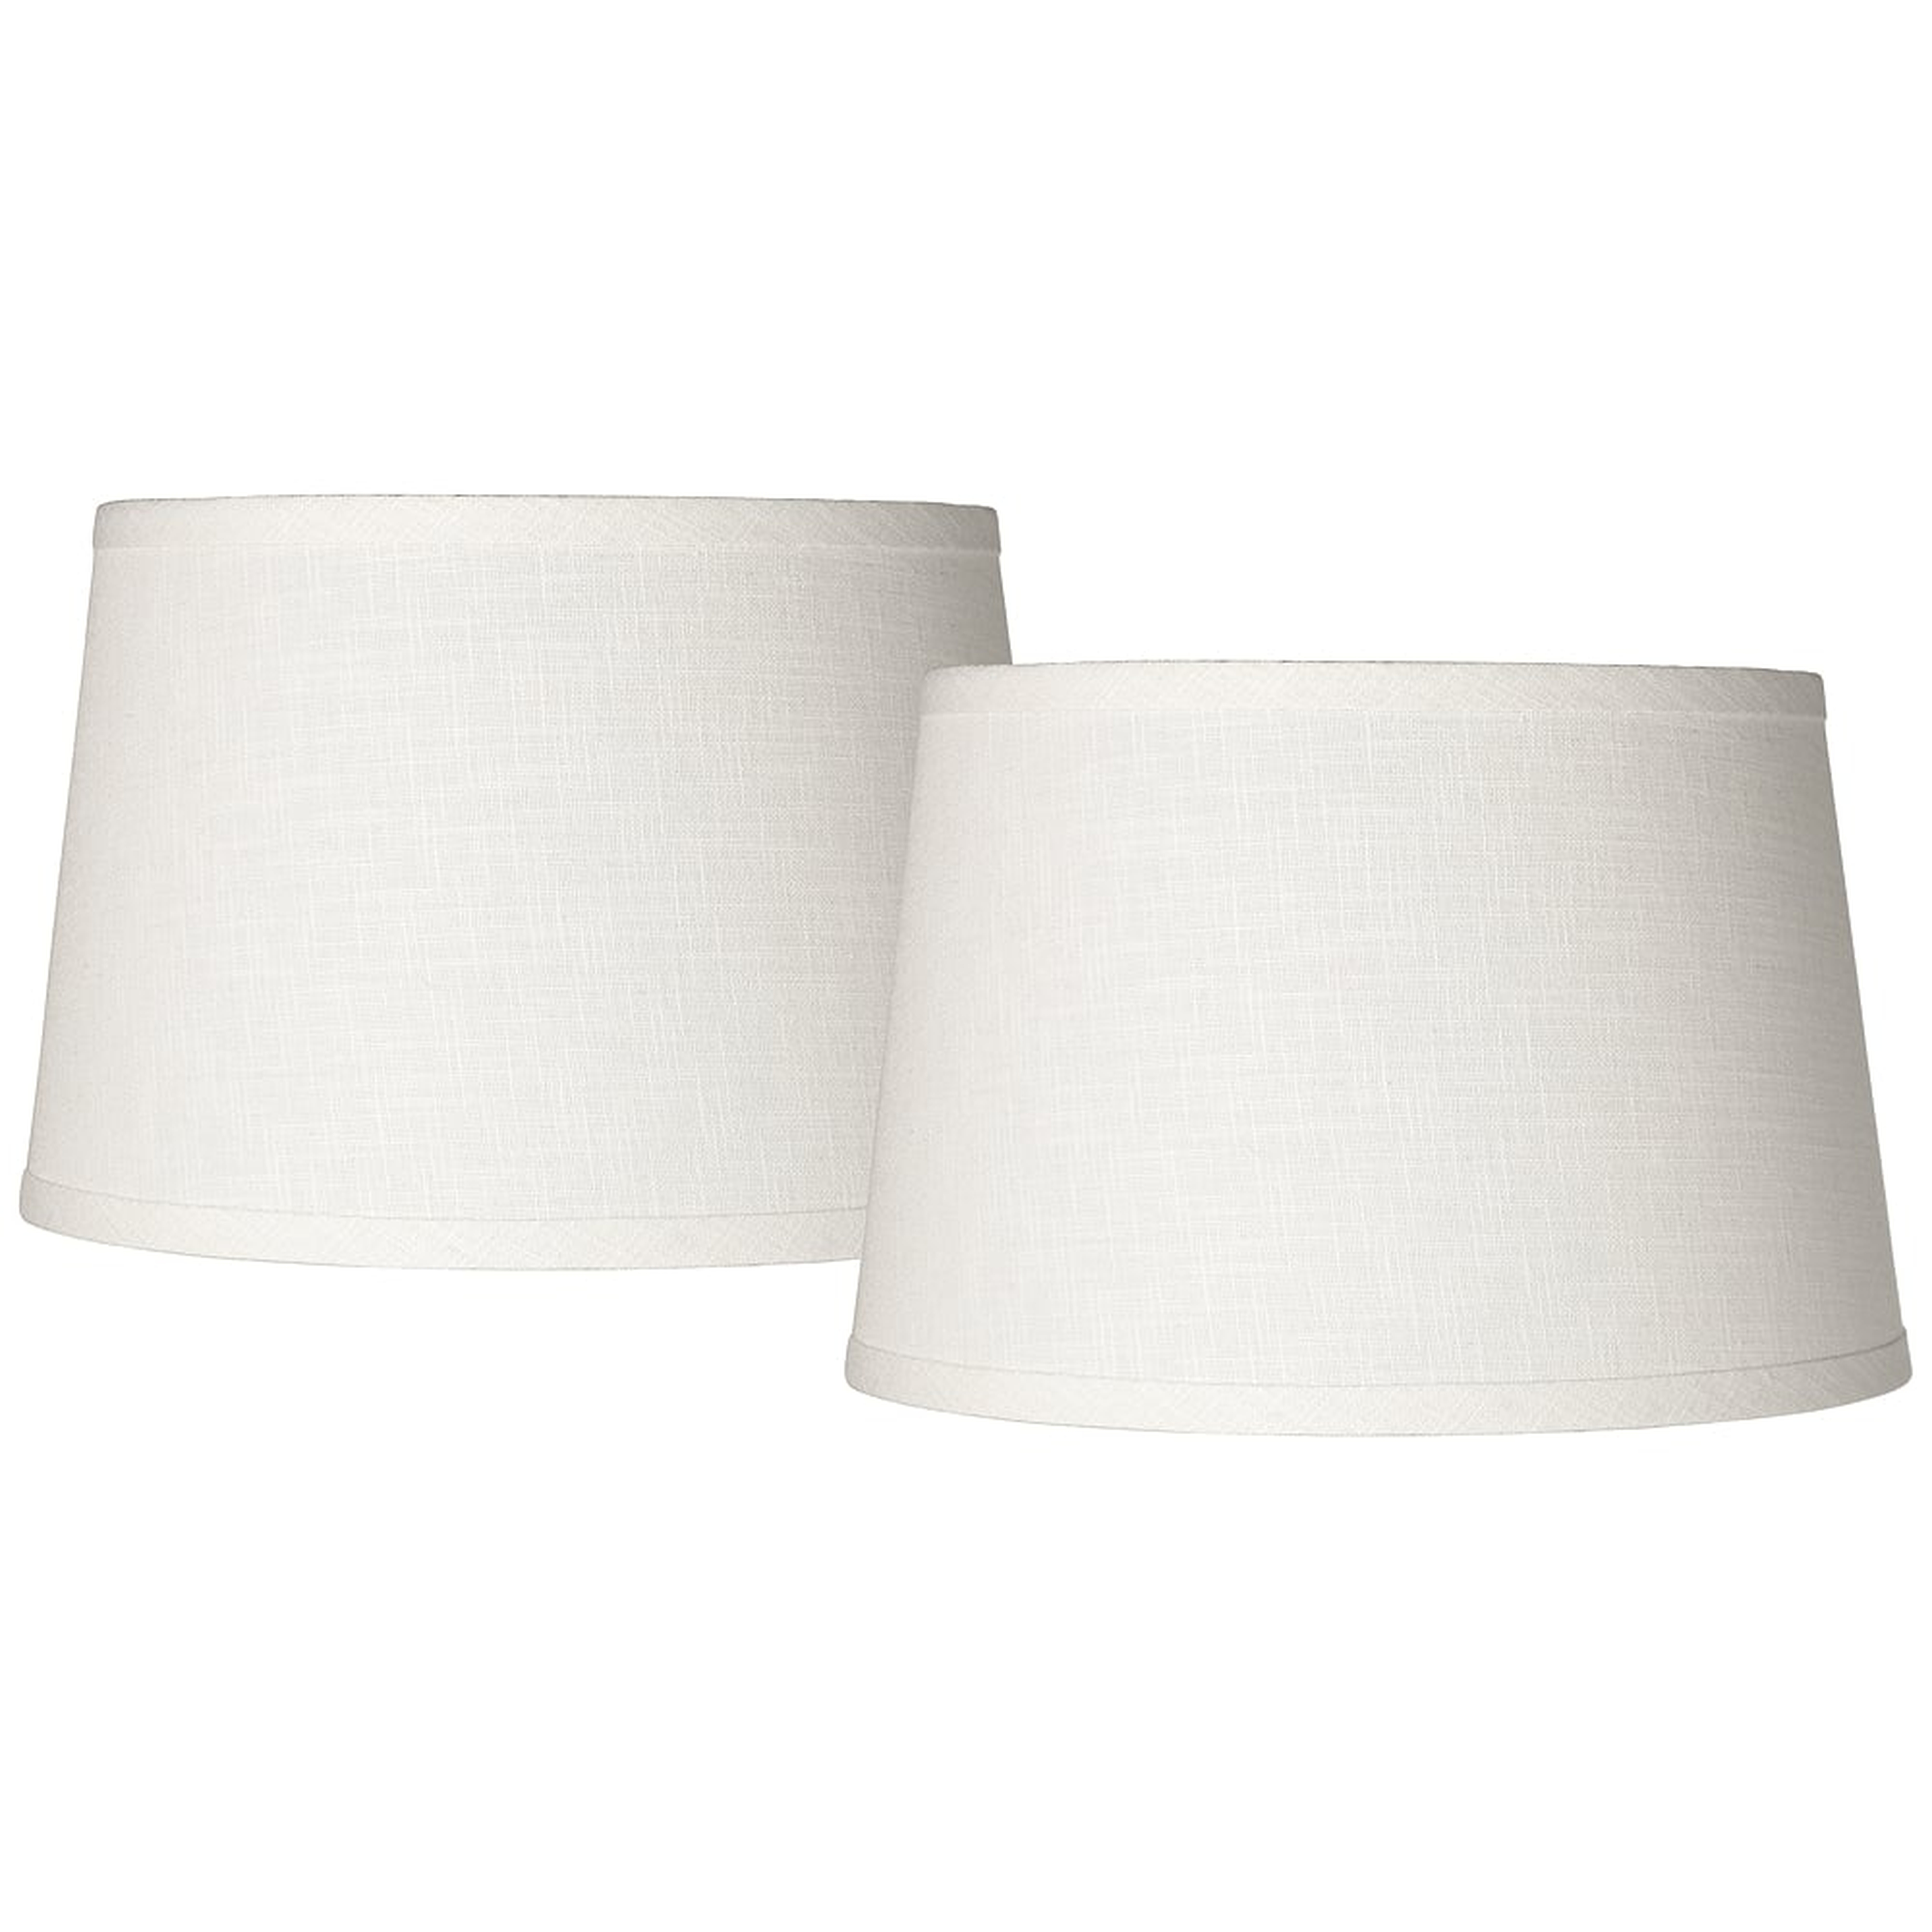 Set of 2 White Linen Drum Lamp Shade 10x12x8 (Spider) - Style # 35H43 - Lamps Plus